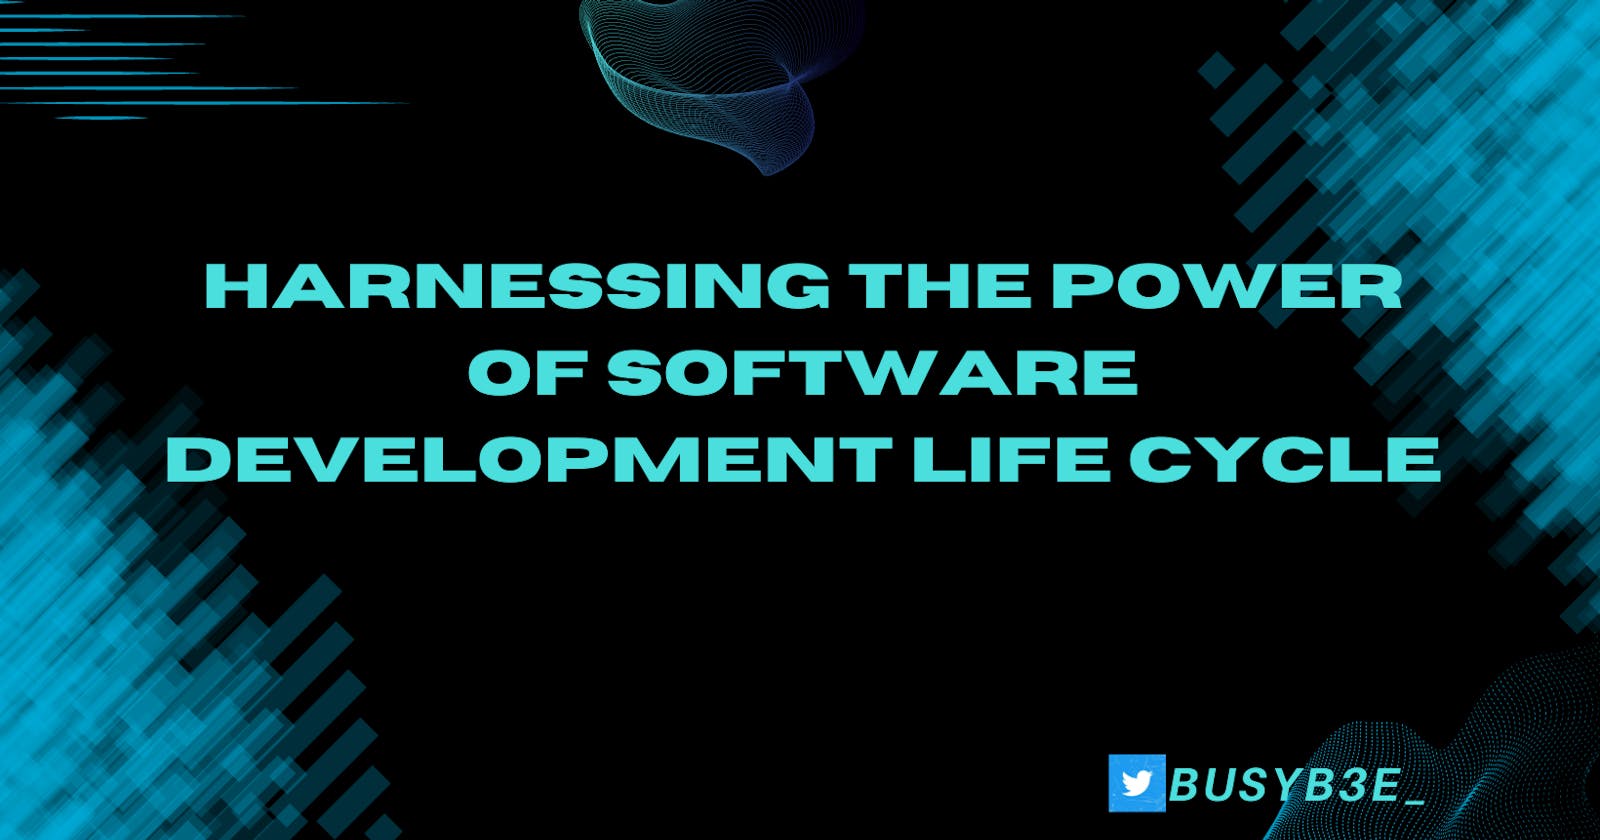 Harnessing the Power of the Software Development Life Cycle